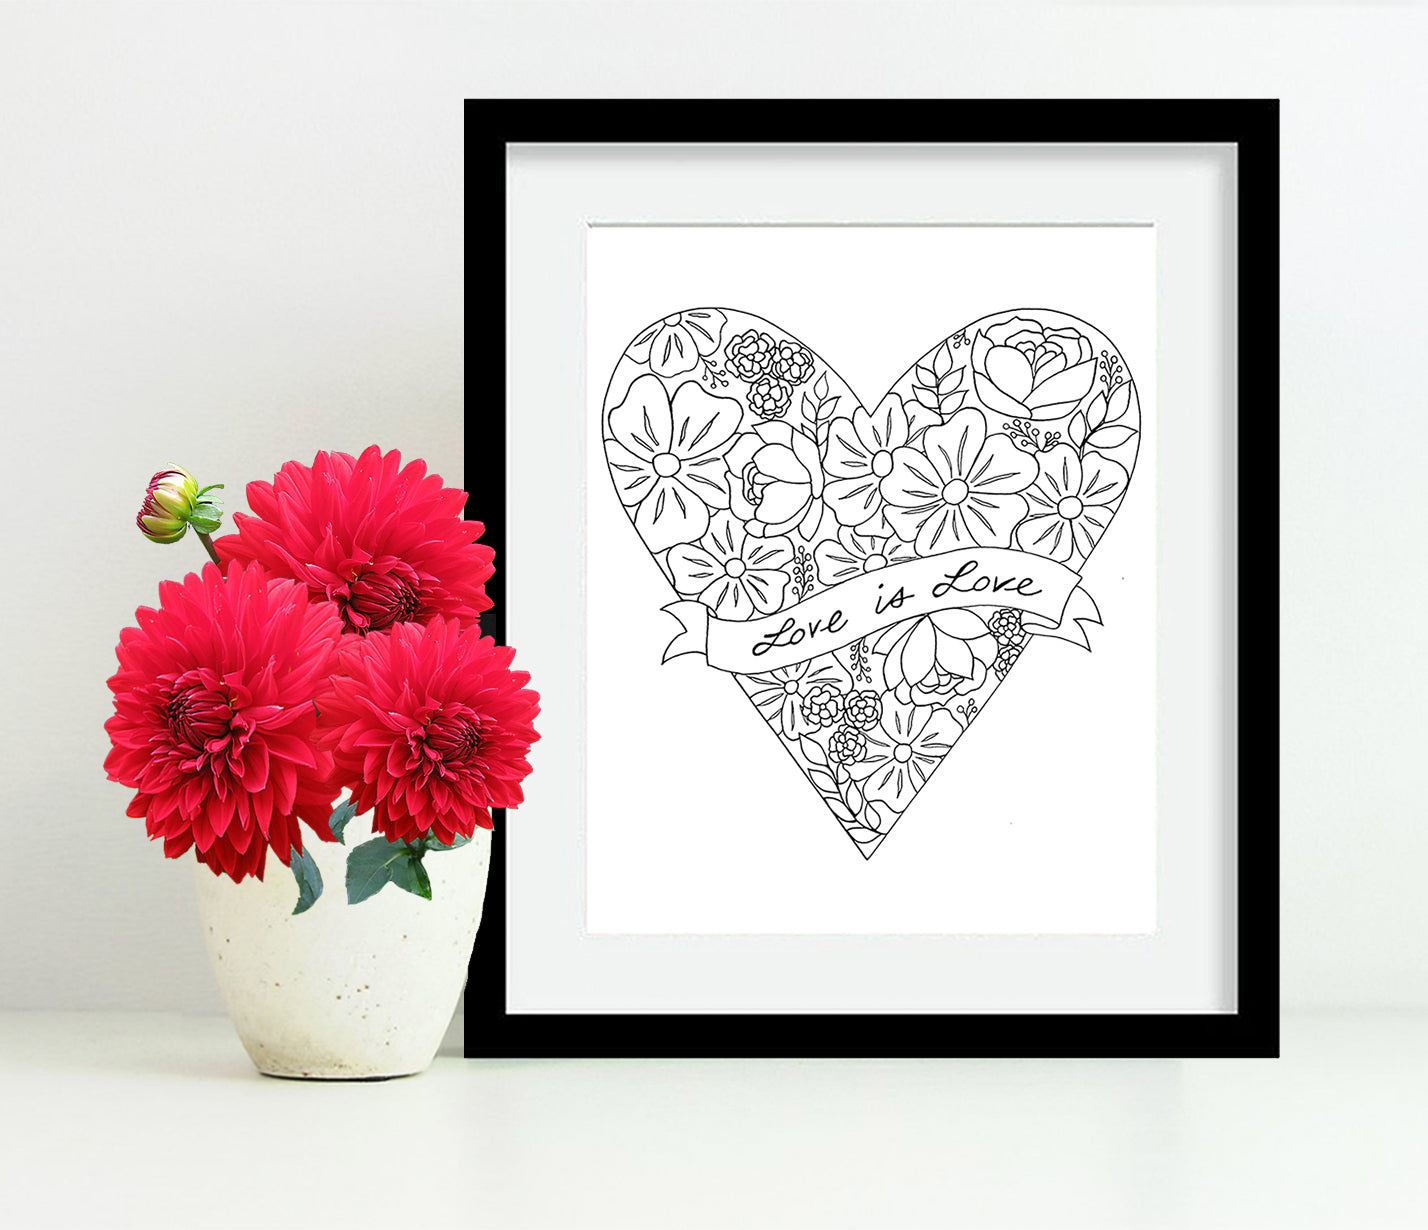 Love is Love Heart with Flowers 8x10 Art Print by Tanya Madoff